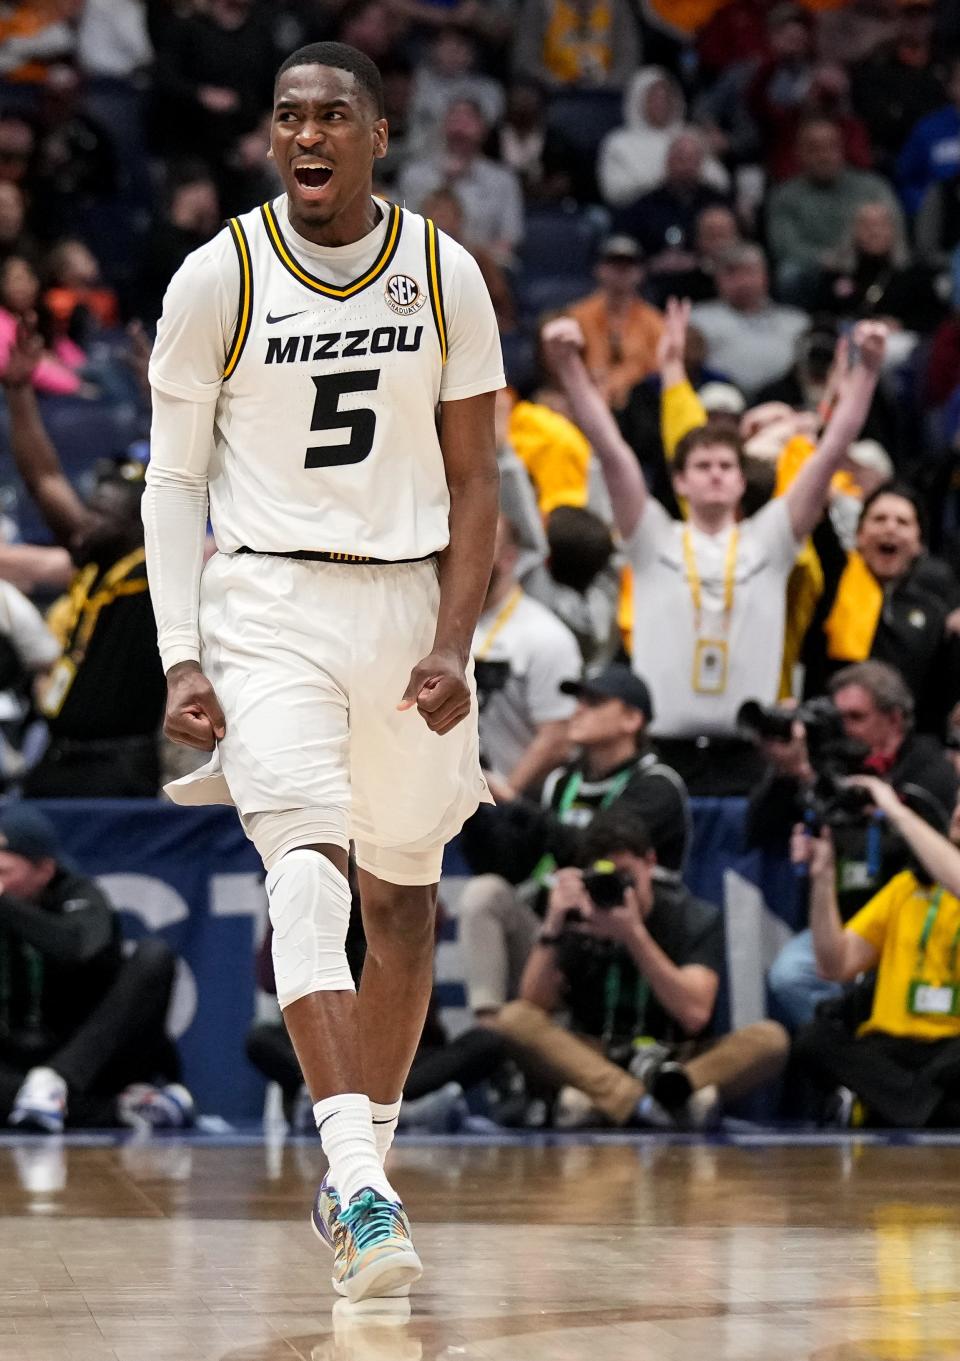 Missouri guard D'Moi Hodge (5) celebrates his three-point basket against Tennessee during the second half of a SEC Men’s Basketball Tournament quarterfinal game at Bridgestone Arena in Nashville, Tenn., Friday, March 10, 2023.